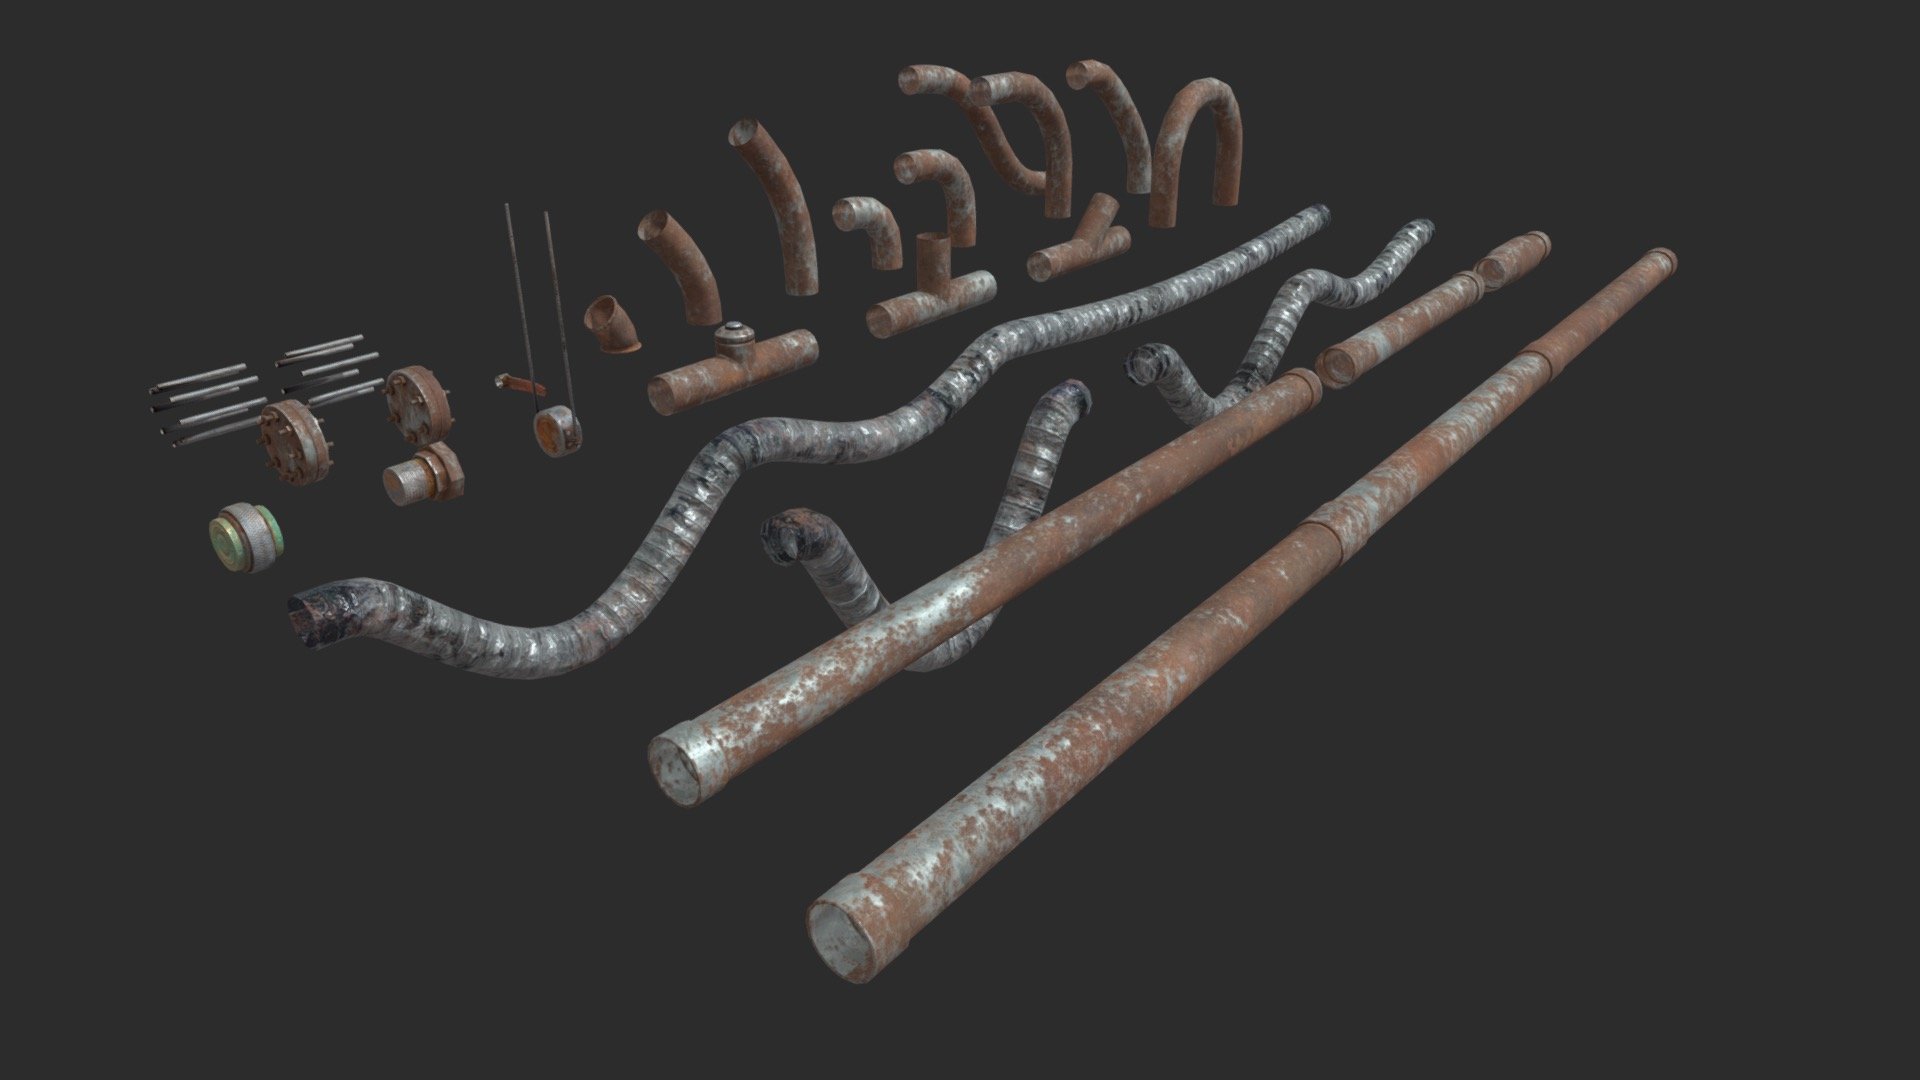 This modular pipes asset pack including 27 individual set Ø10 pipes with 4 LODs and colliders to get a good optimization. All elements can easily be positioned together by moving in 10cm increments. Also, this pack includes 37 pre-assembled sets to allow you to speed up your assemblies. 



INDIVIDUAL SETS INCLUDE :




4 elbow 90°

3 elbow 45°

1 U pipe

1 S pipe

2 T pipes

1 Y pipe

4 straight pipes

3 flexible pipes

2 screw joints

1 mounting bracket

1 handle valve

2 end of pipes

2 threaded rod sets

SPECIFICATIONS




Objects : 64

Polygons : 4975

GAME SPECS




LODs : Yes (inside FBX for Unity &amp; Unreal)

Numbers of LODs : 4

Collider : Yes

Lightmap UV : No

EXPORTED FORMATS




FBX

Collada

OBJ

TEXTURES




Materials in scene : 1

Textures sizes : 4K

Textures types : Base Color, Metallic, Roughness, Normal (DirectX &amp; OpenGL), Heigh &amp; AO (also Unity &amp; Unreal workflow maps)

Textures format : TGA &amp; PNG
 - Modular Pipes - Rusted - Buy Royalty Free 3D model by KangaroOz 3D (@KangaroOz-3D) 3d model